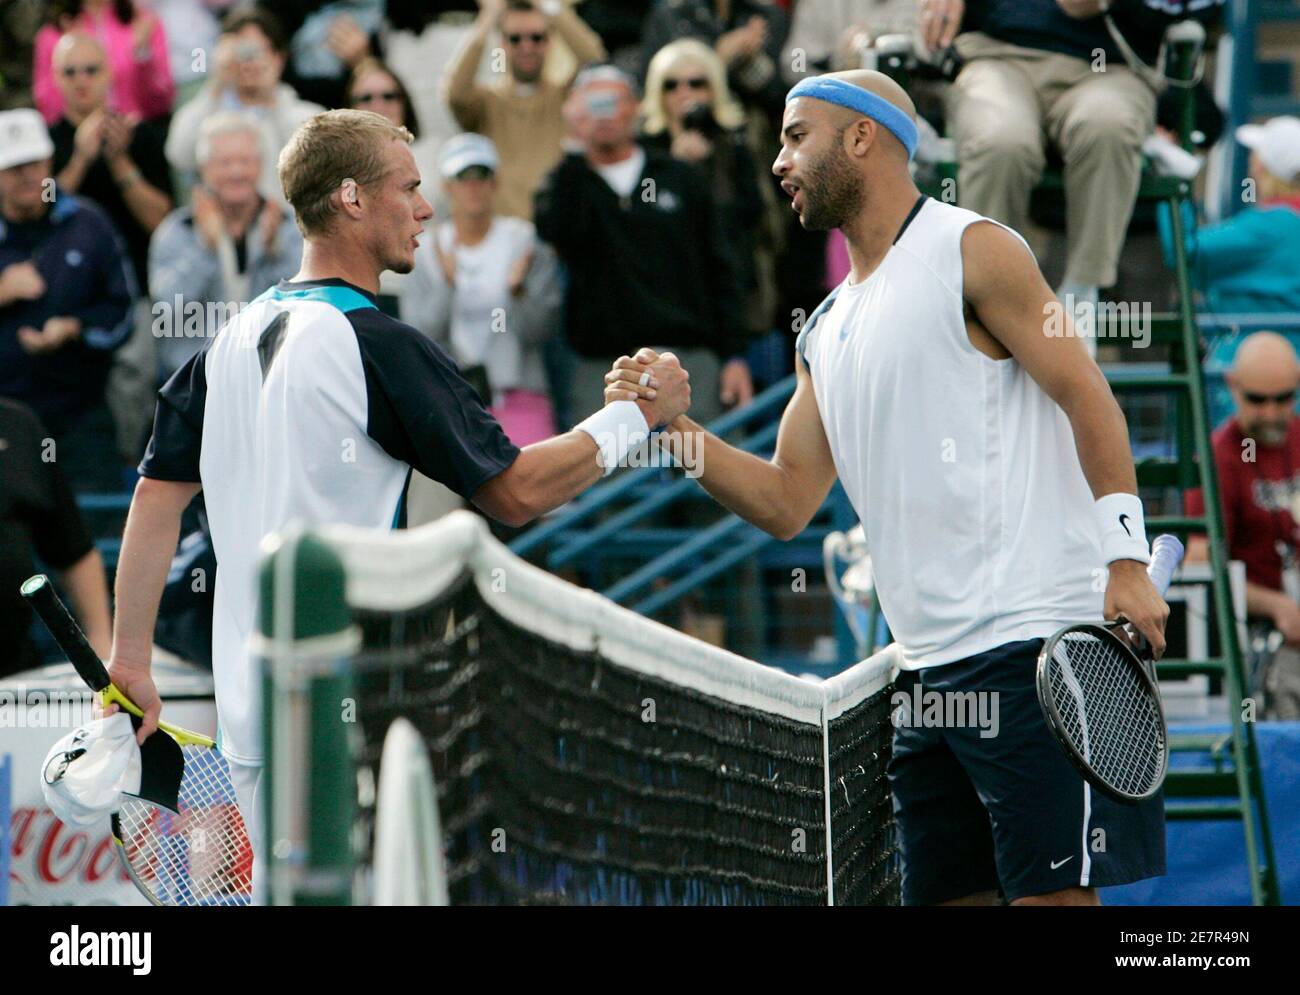 Lleyton Hewitt (L) of Australia shakes hand with James Blake of the U.S. after their men's singles final during the Tennis Channel Open in Las Vegas March 5, 2006. Blake beat Hewitt 7-5 2-6 6-3.  REUTERS/Las Vegas Sun/Steve Marcus Stock Photo